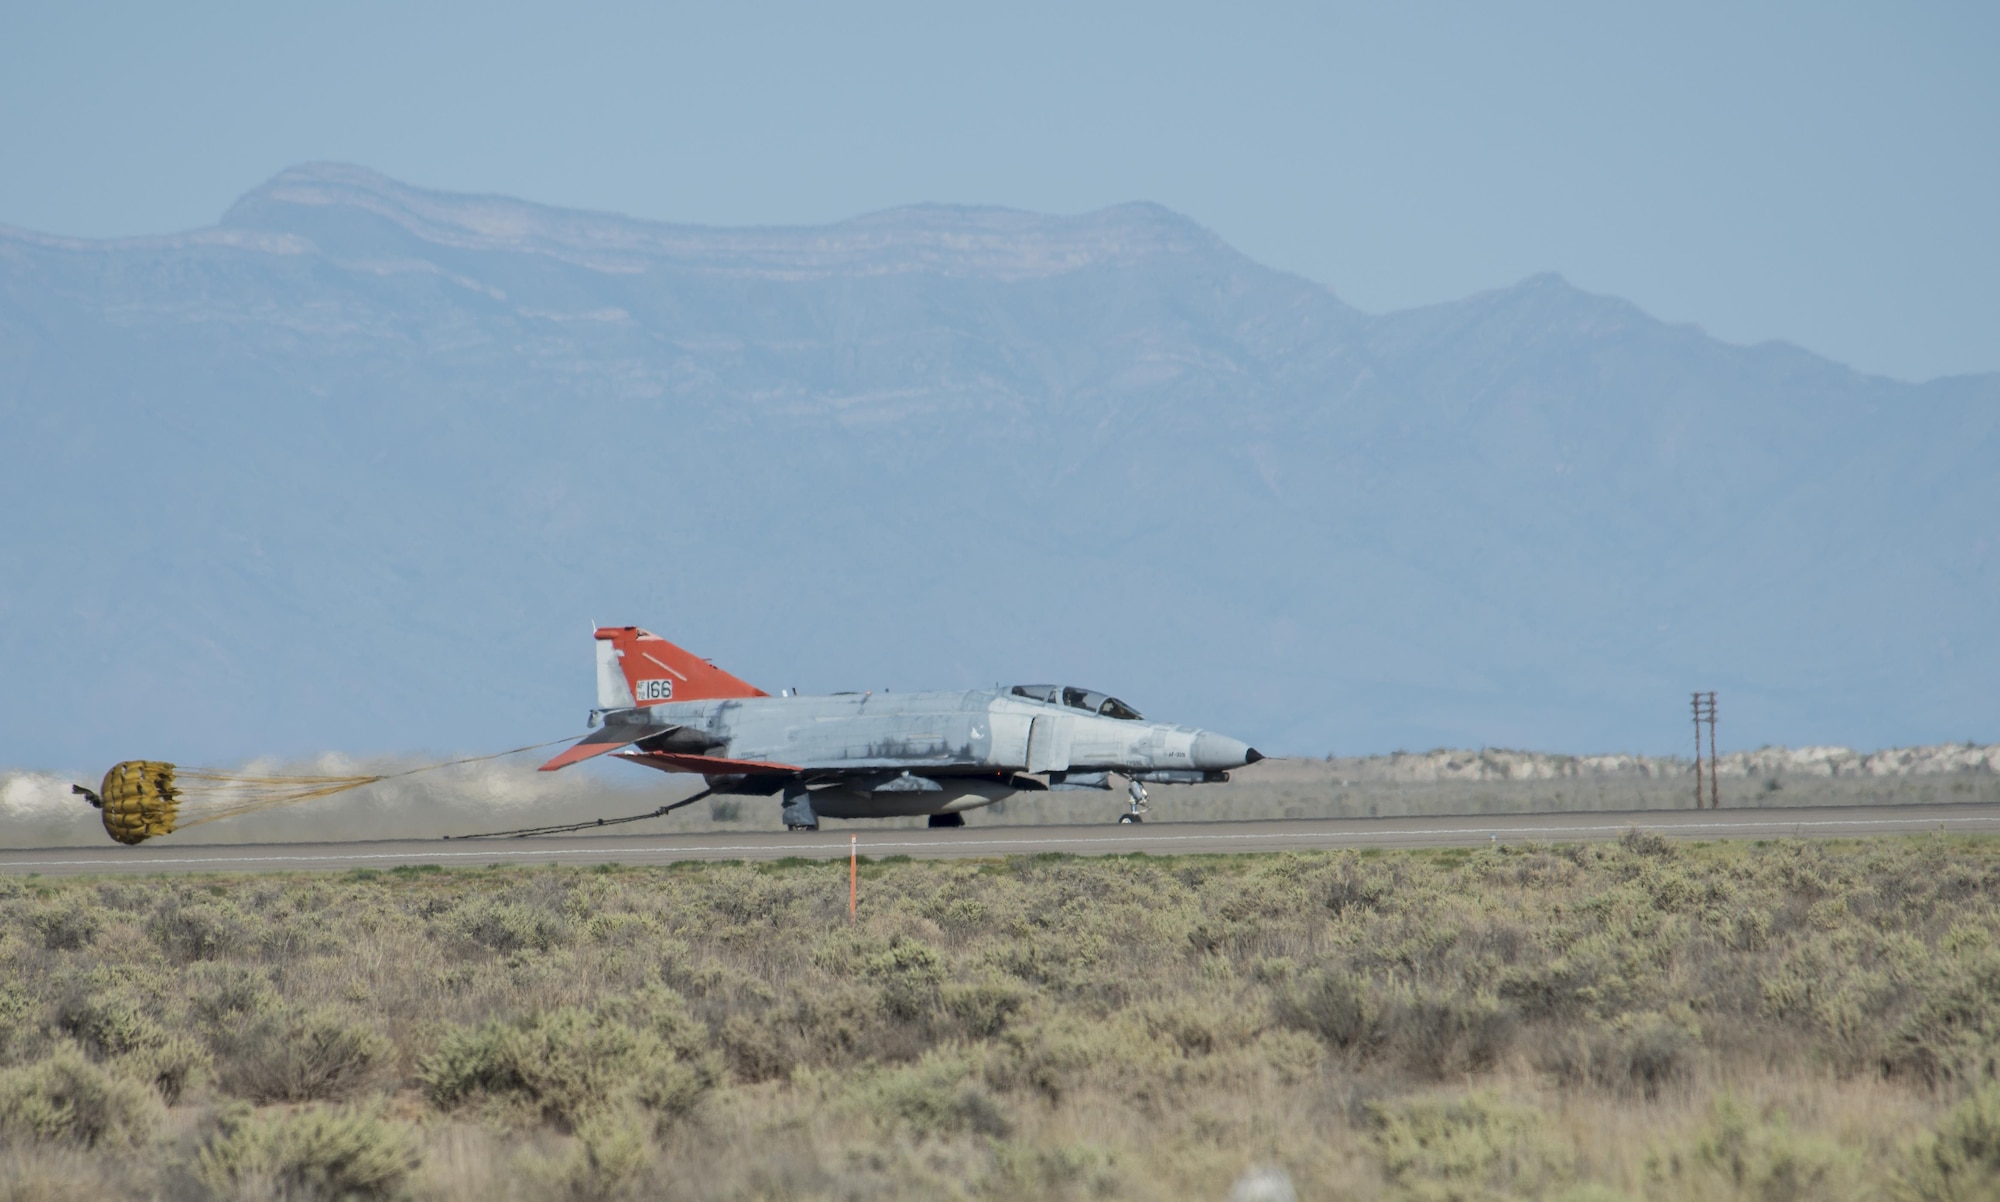 A QF-4 Phantom returns to Holloman Air Force Base after supporting an F-35 Lightning II mission in the skies above White Sands Missile Range, N.M. on Aug. 17. During the mission, an unmanned QF-4 served its primary function as an aerial target, while a manned QF-4 trailed to ensure mission success. (U.S. Air Force photo by Airman 1st Class Randahl J. Jenson) 